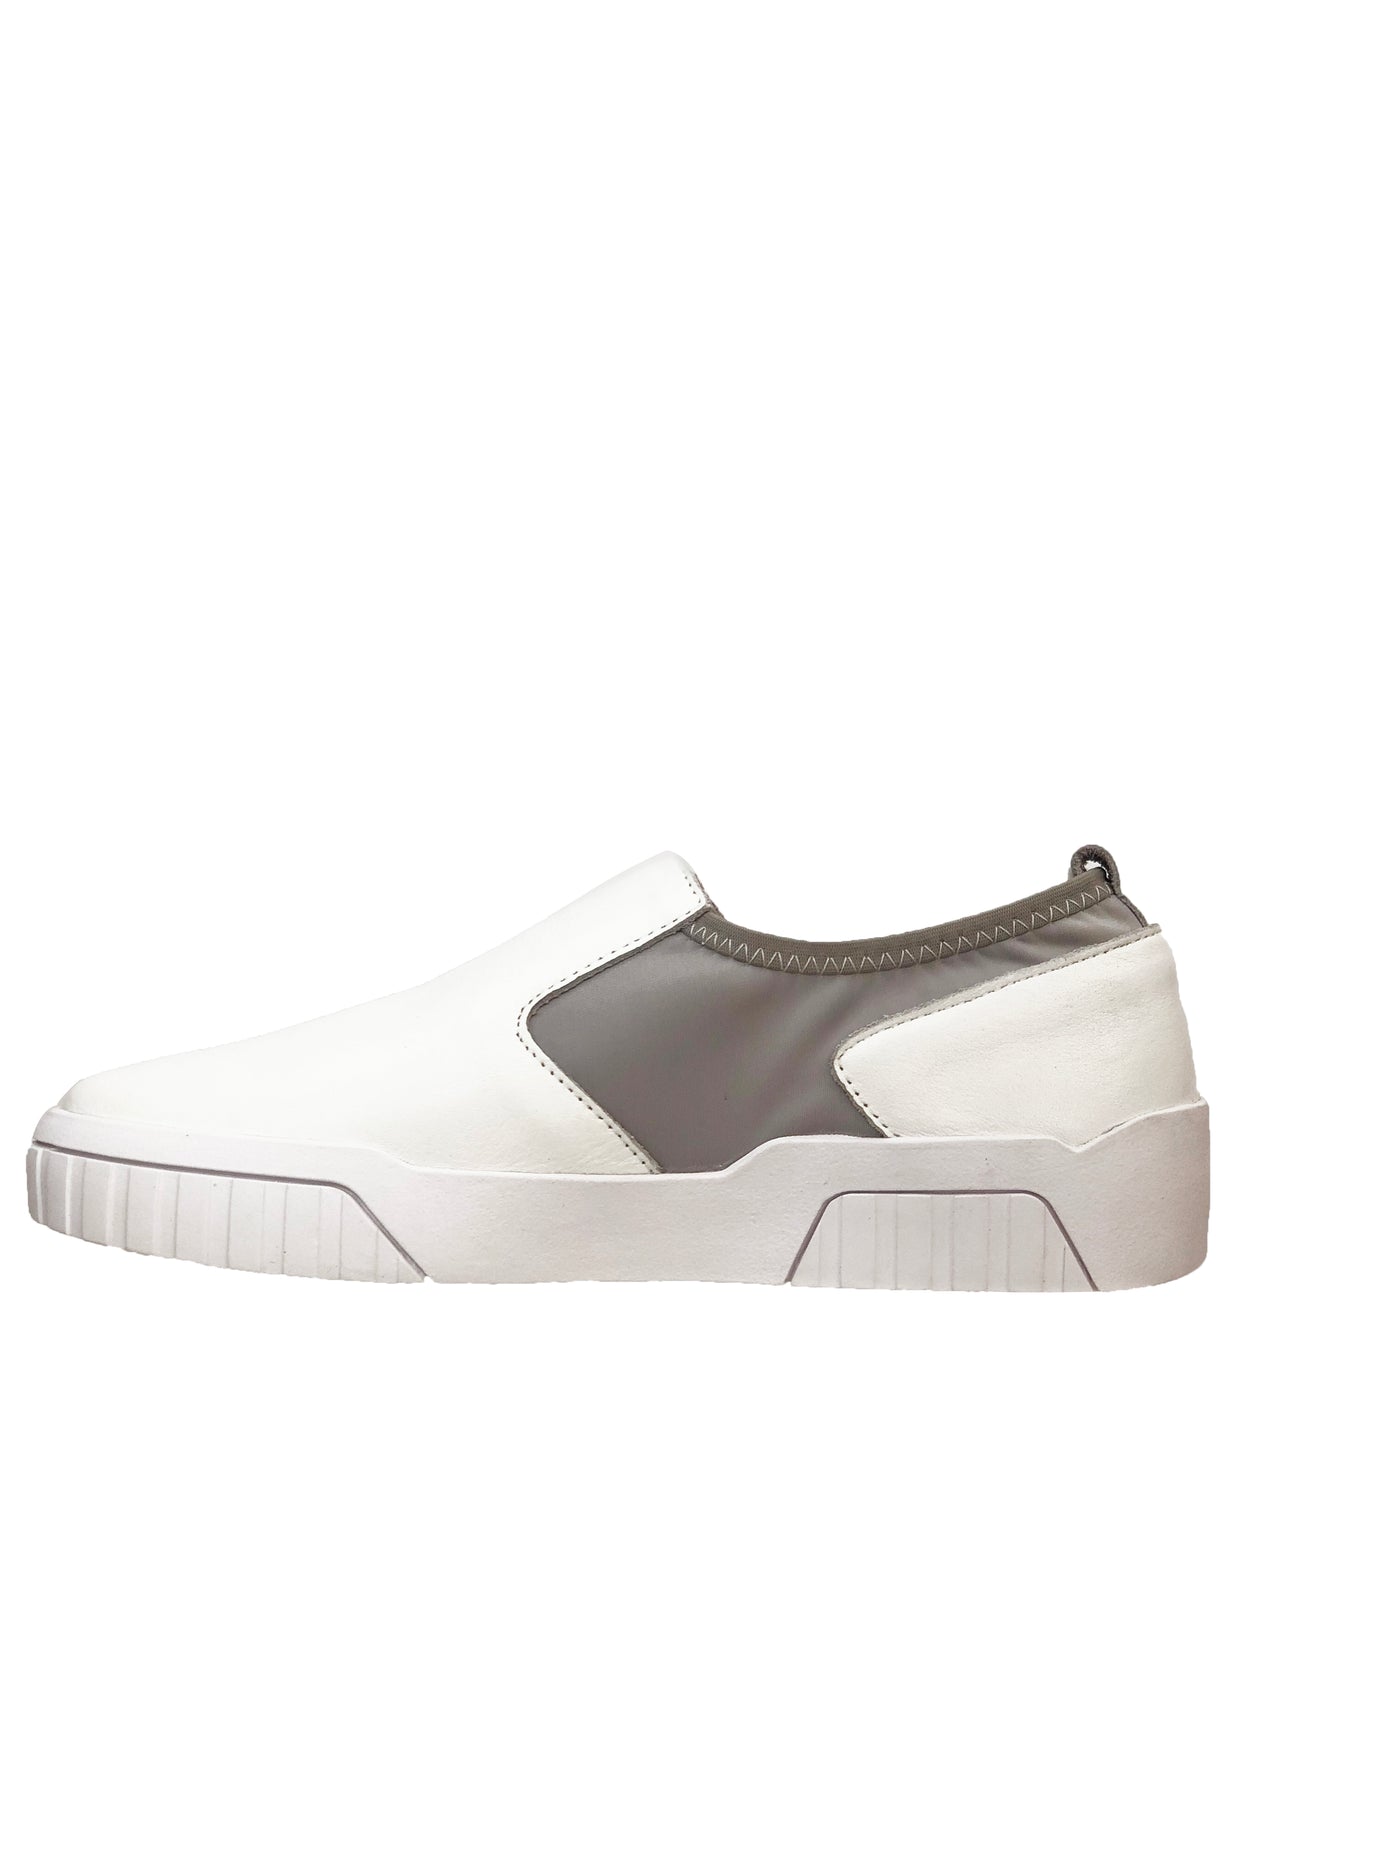 GELATO ROLICK WHITE/GREY - Collective Shoes 